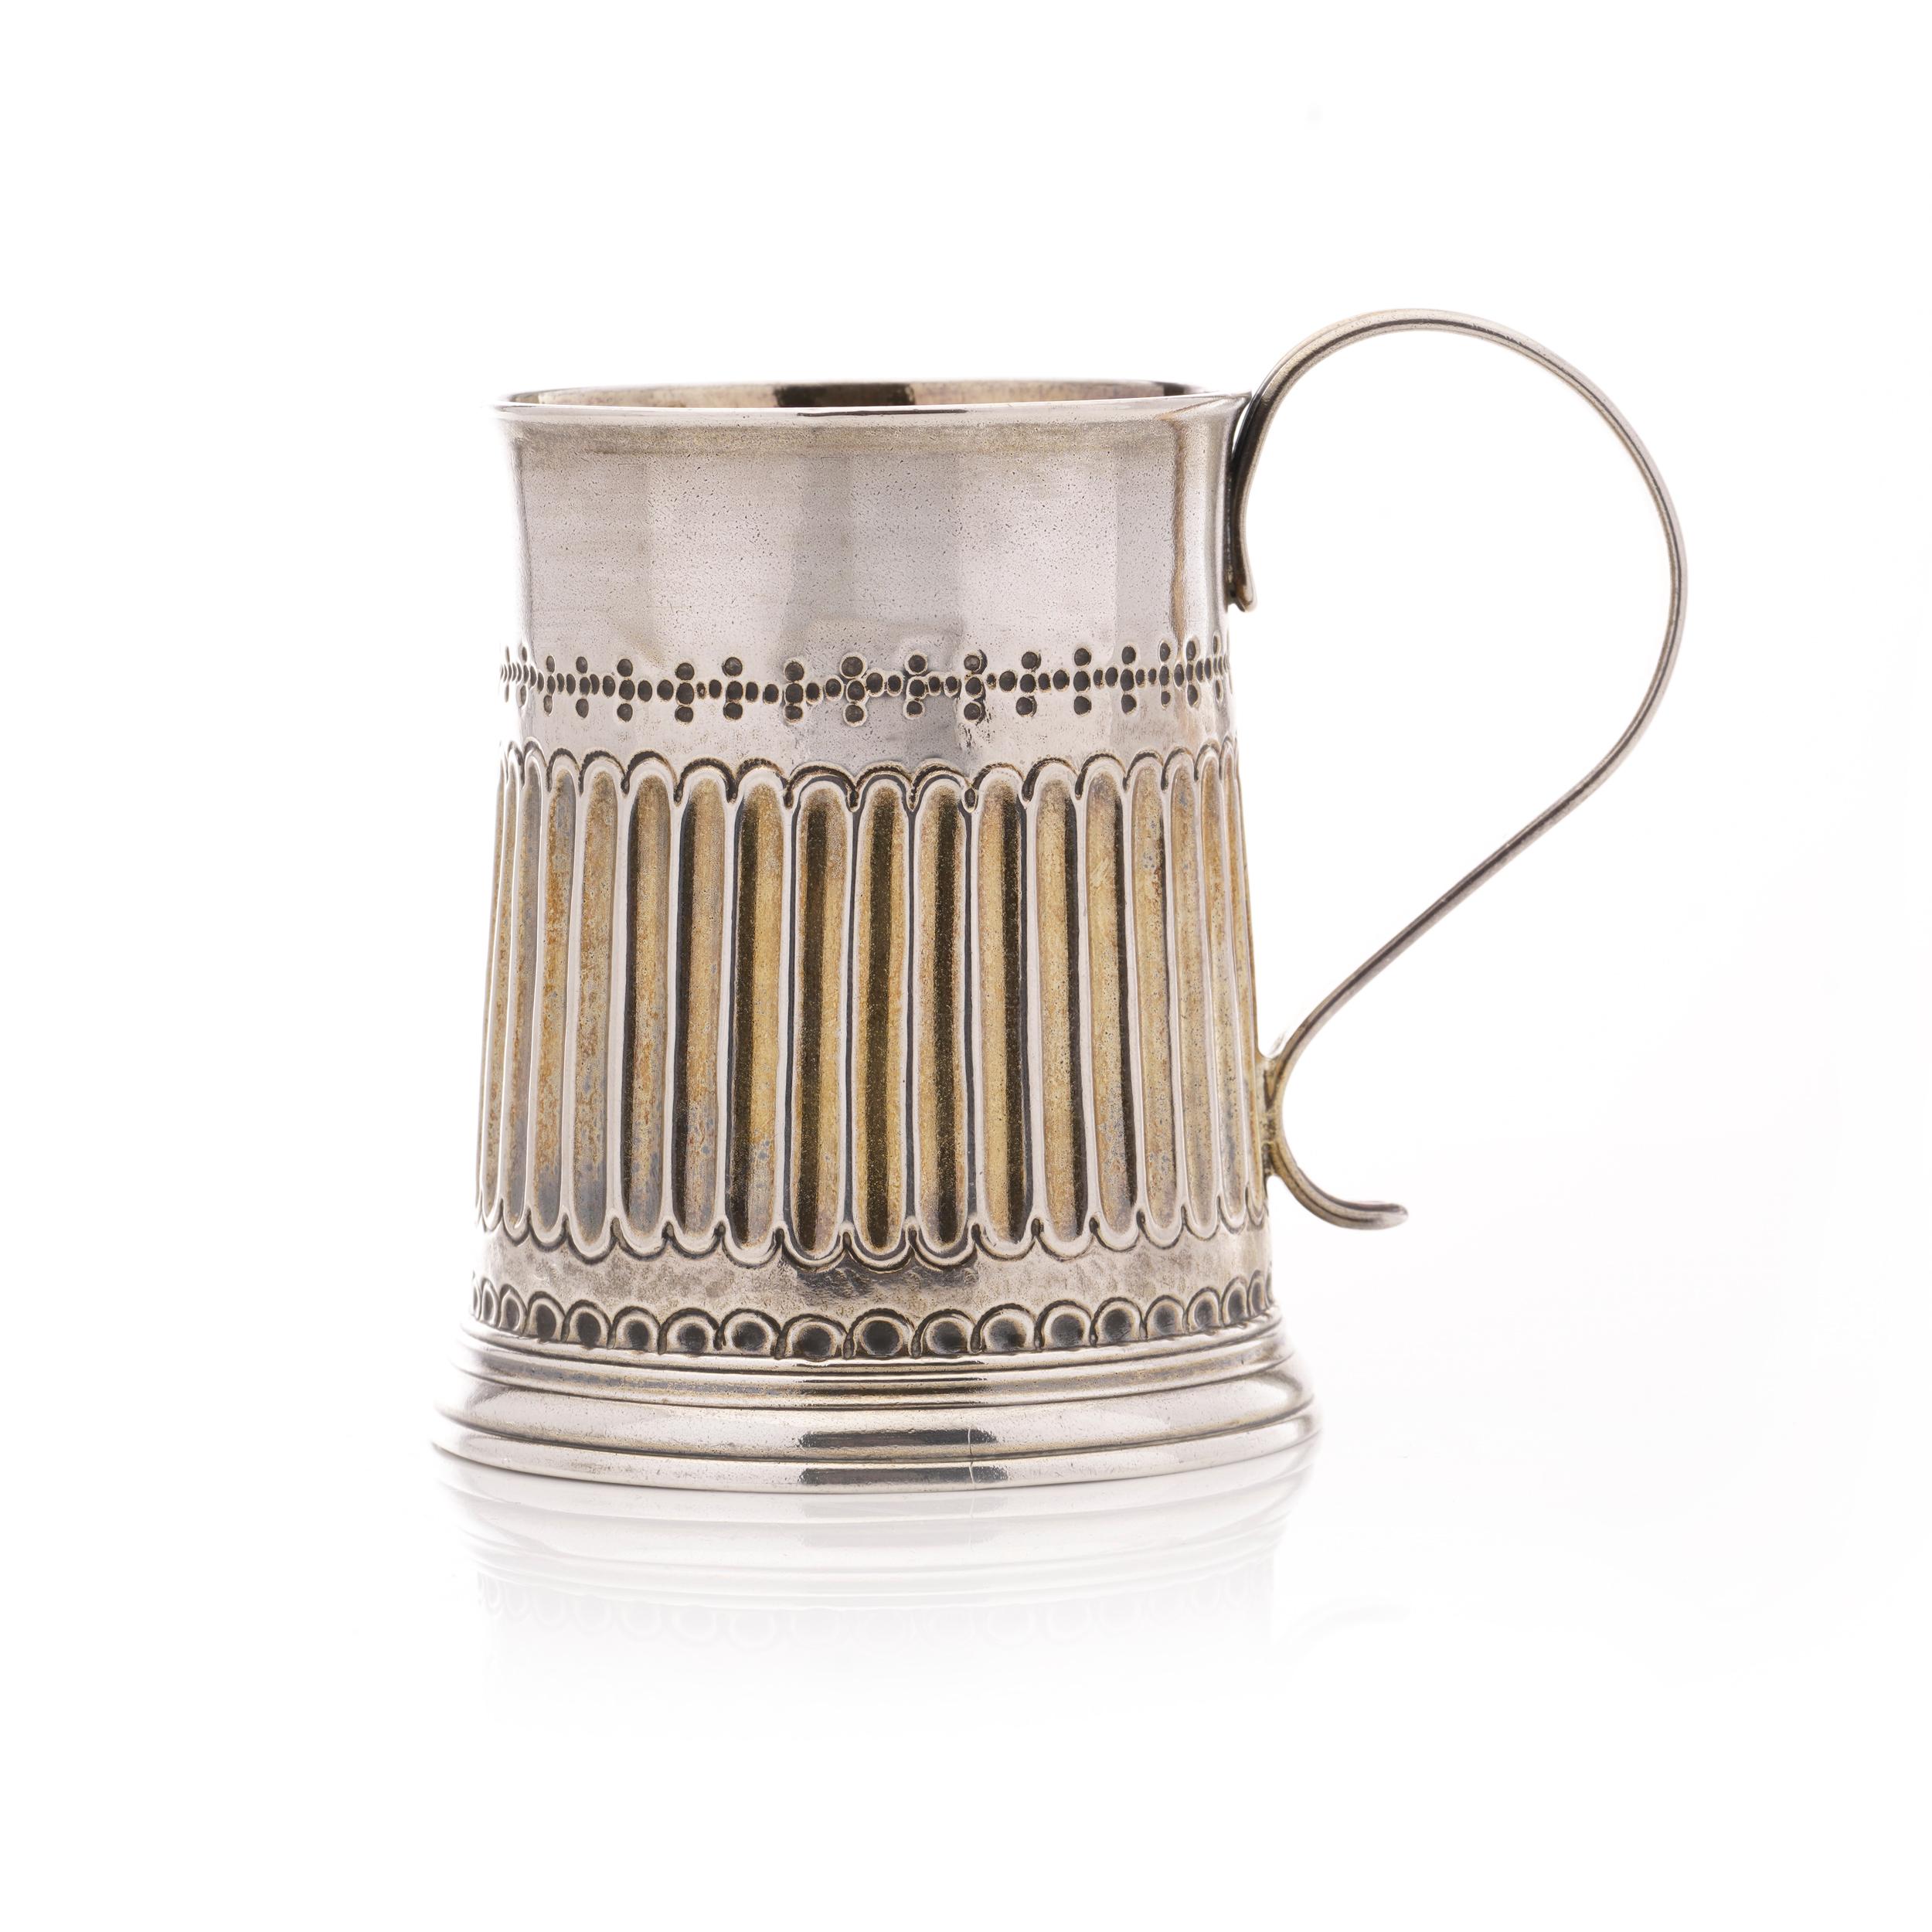 Antique Georgian sterling 925 silver tankard.
Made in England, London, 1764
Maker: John Robinson II
Fully hallmarked. 

Dimensions:
Height: 10 cm ( Including handle )
Length: 11 cm ( Including handle ) 
Diameter: 7.2 cm 
Weight: 235 grams